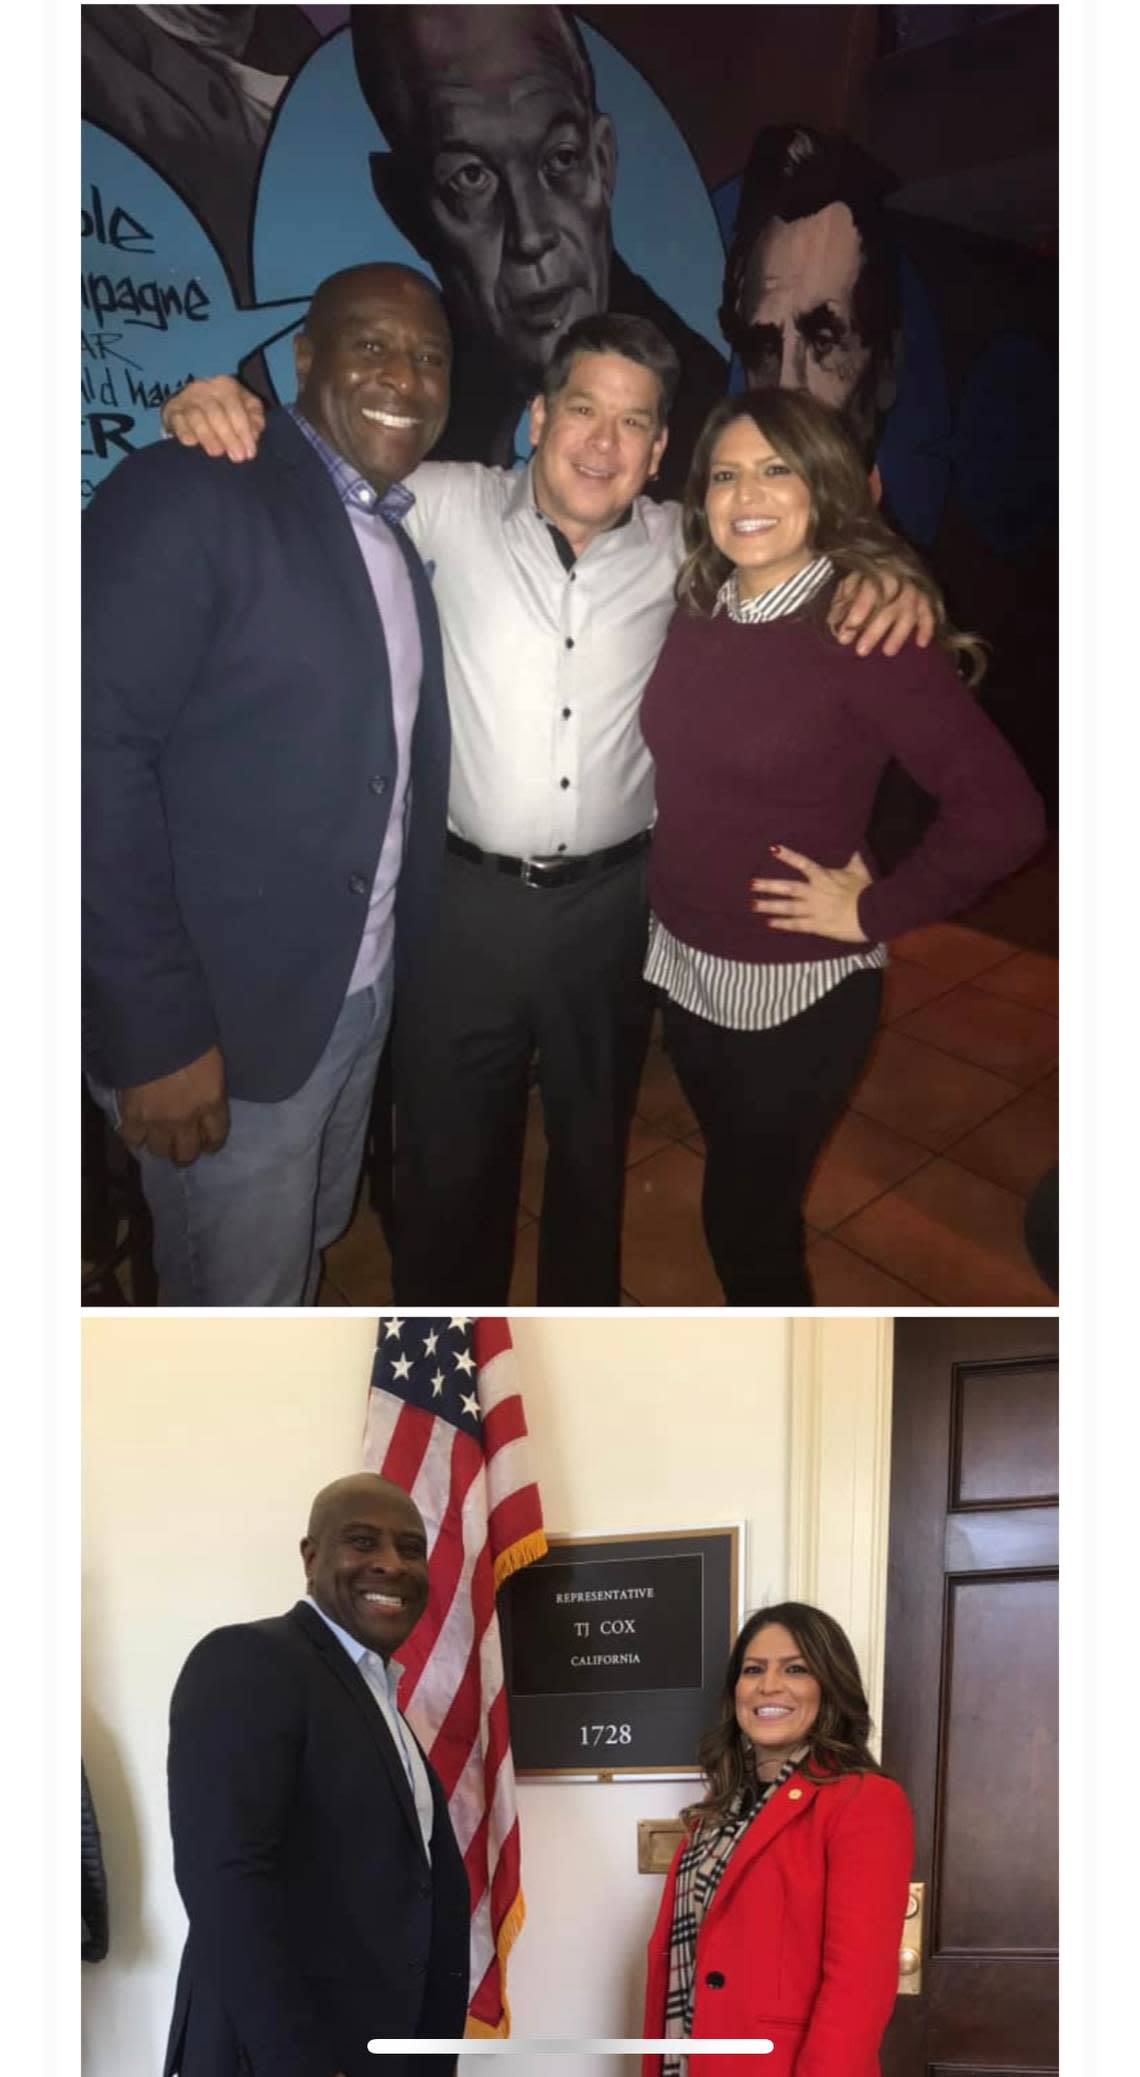 A screenshot of photos used in a news release sent out by Mark Pazin’s campaign team in the race for the 27th District California state assembly seat.